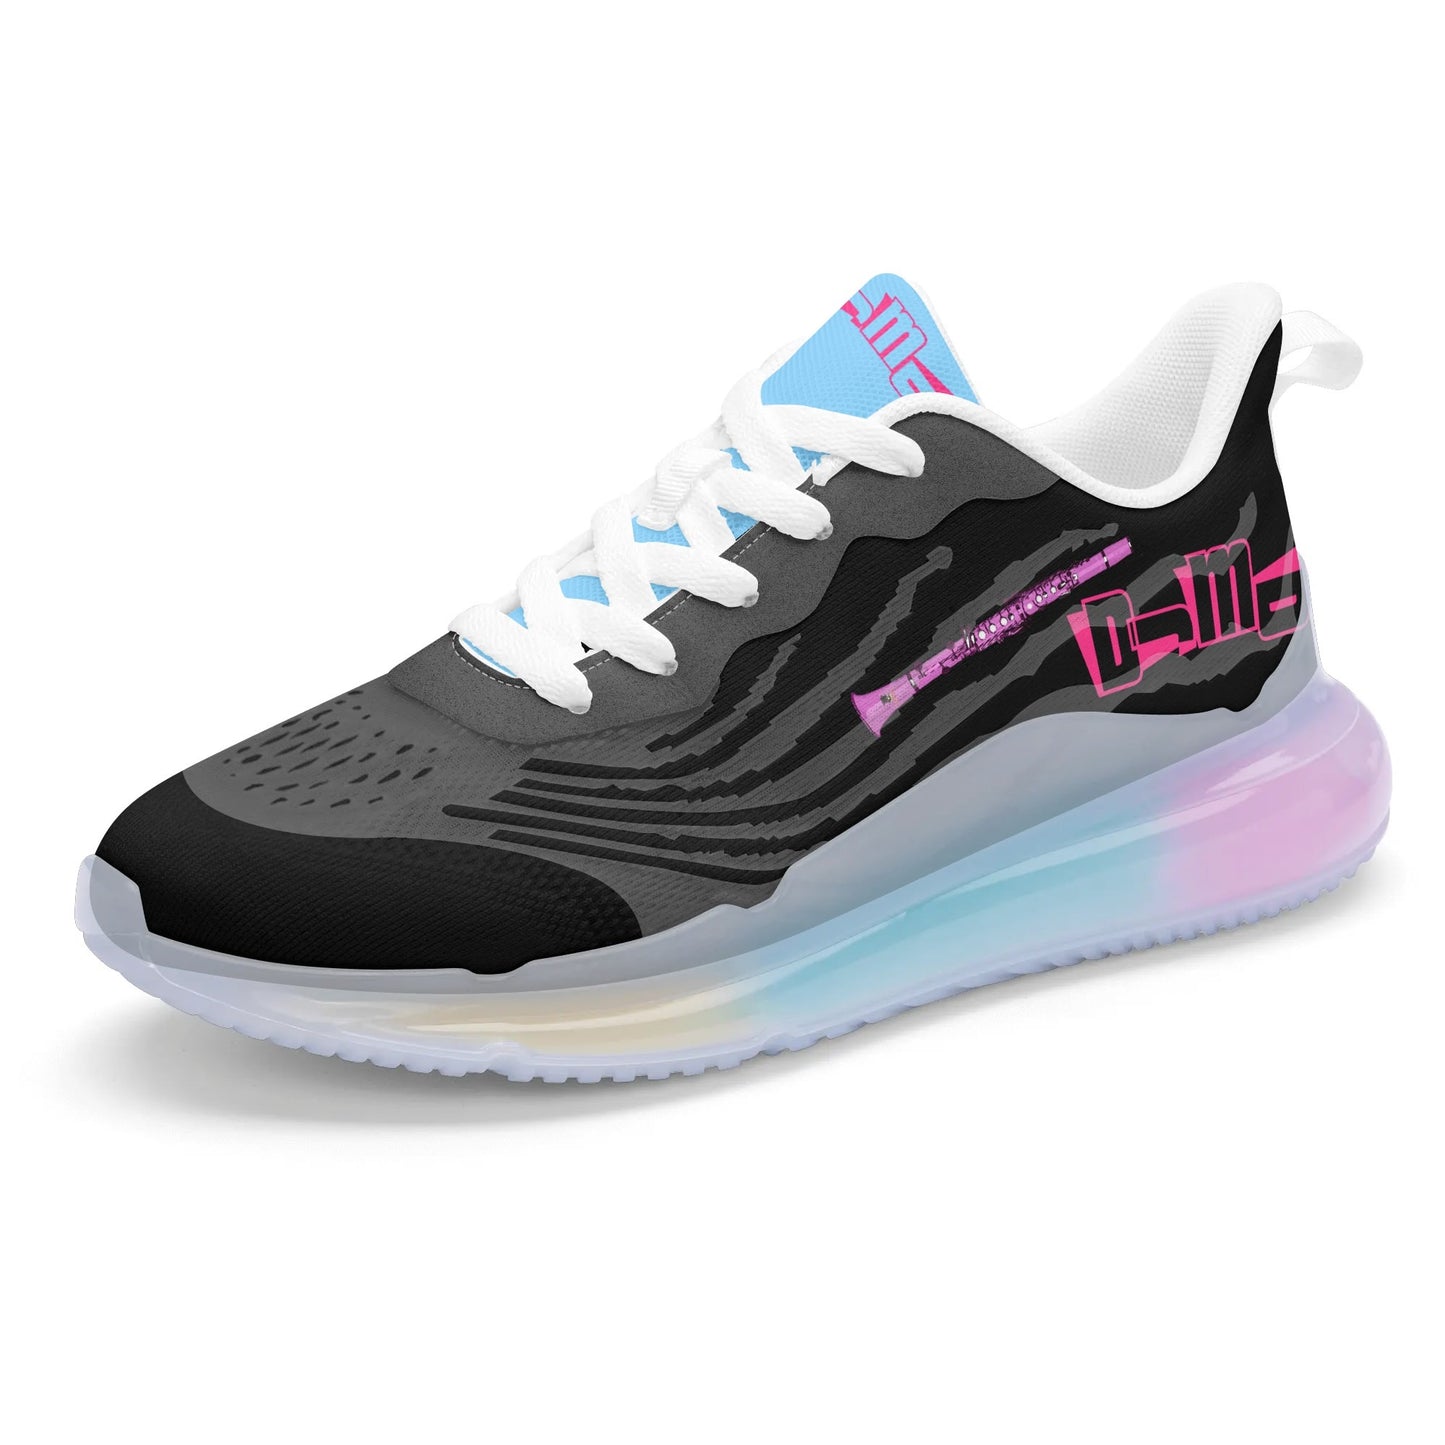 Dnt Juge My Different Womens Rainbow Atmospheric Cushion Running Shoes